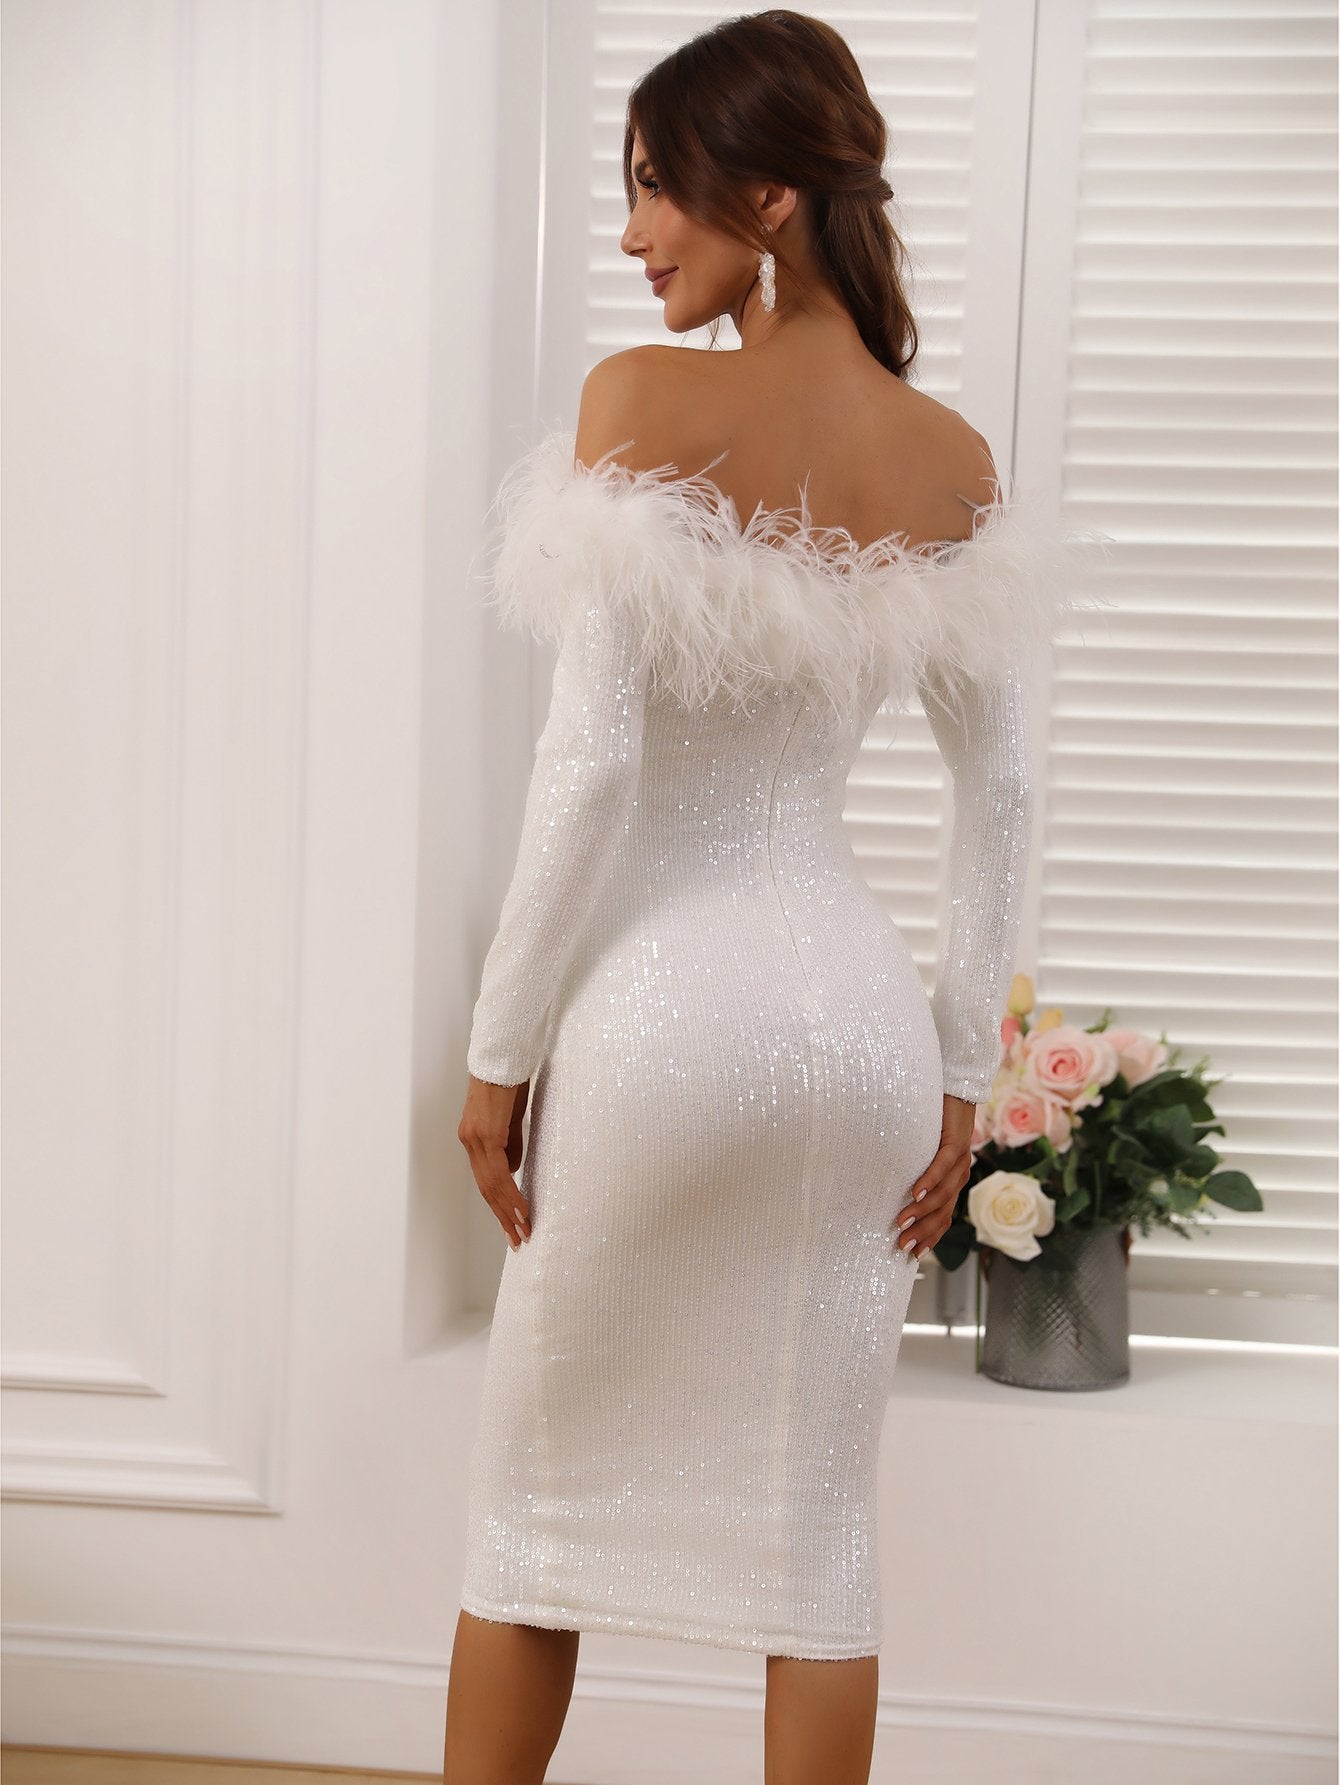 Long Sleeve White Cocktail Dress With Feathers On Top